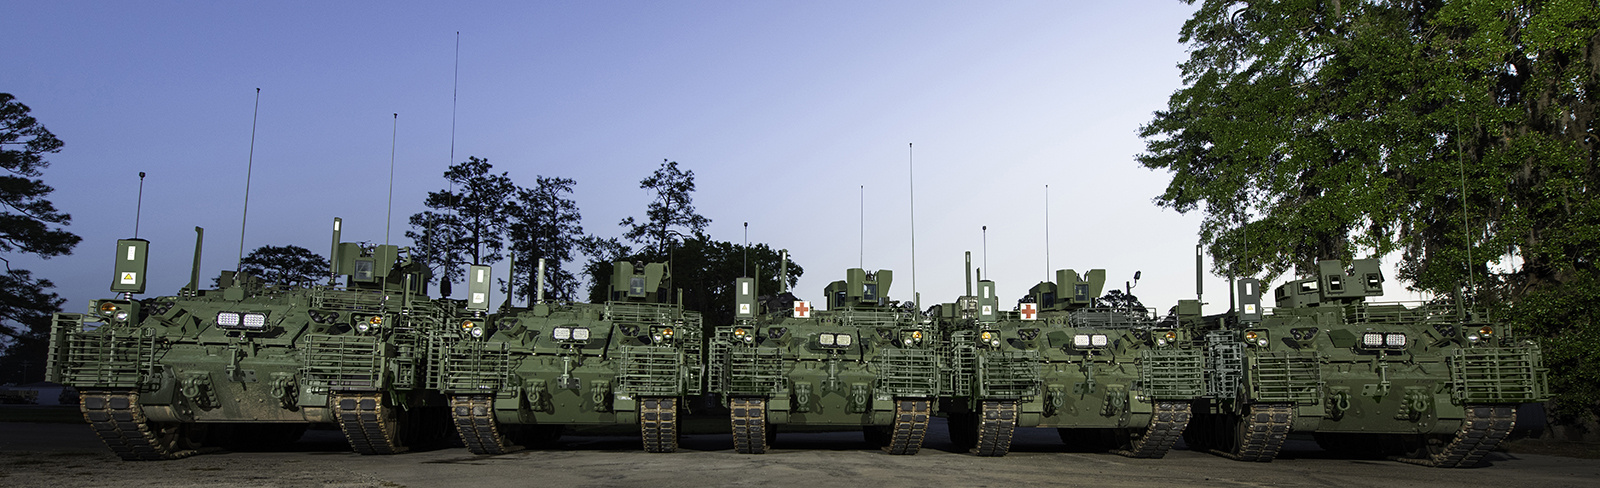 The Armored Multi-Purpose Family of Vehicles is the U.S. Army’s newest combat vehicle and gives Soldiers critical upgrades in mobility, survivability, interoperability and power.